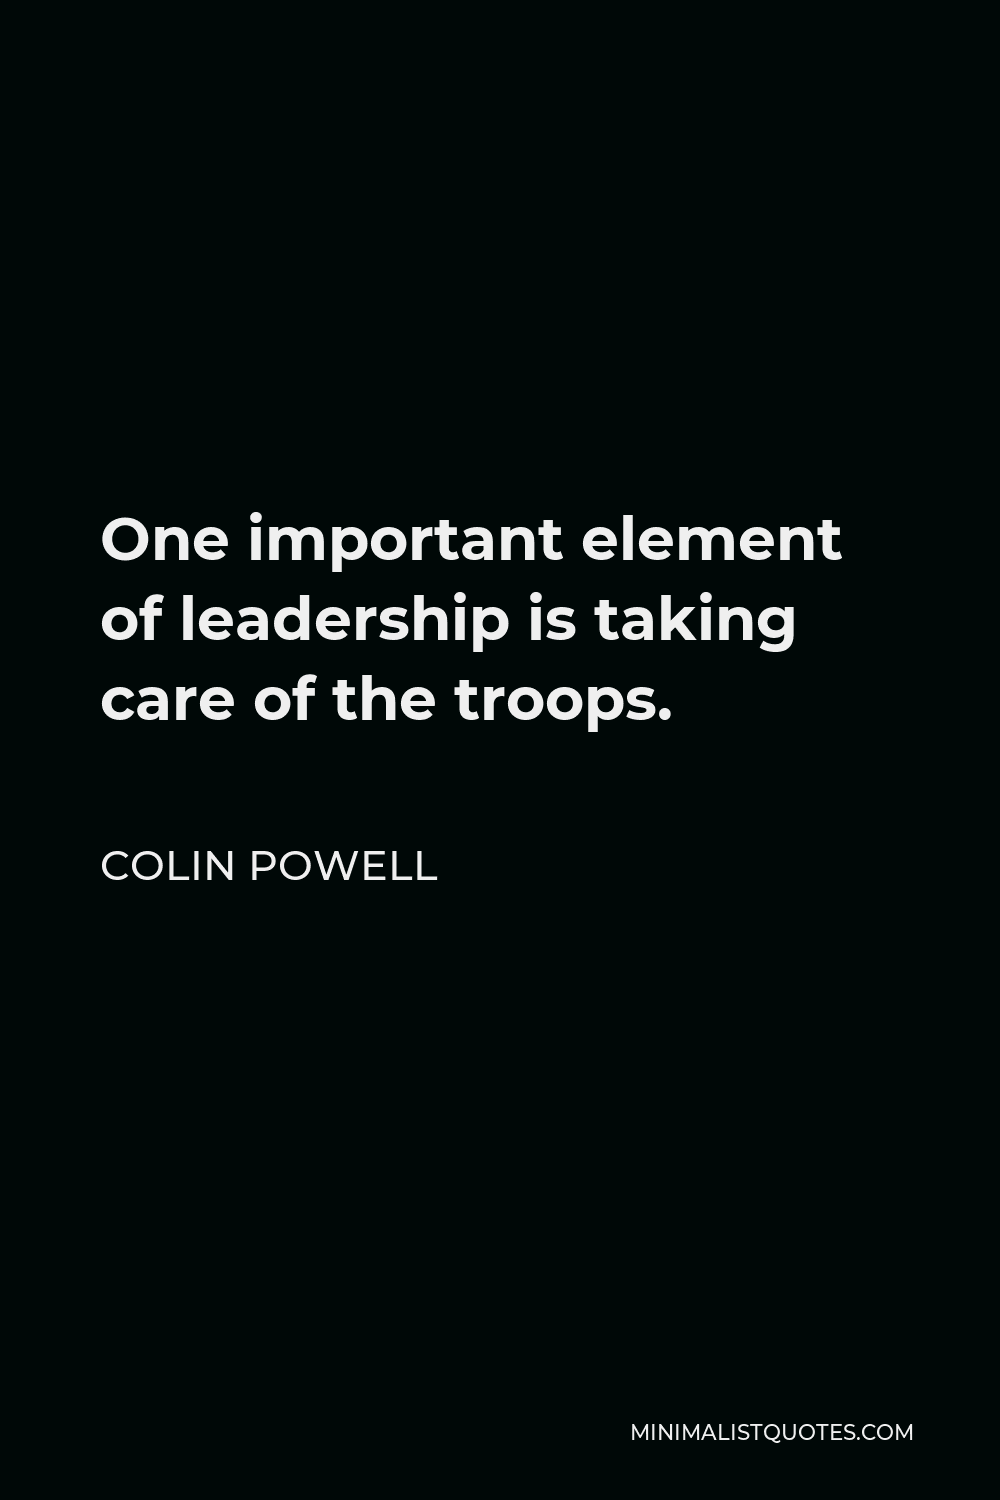 Colin Powell Quote - One important element of leadership is taking care of the troops.